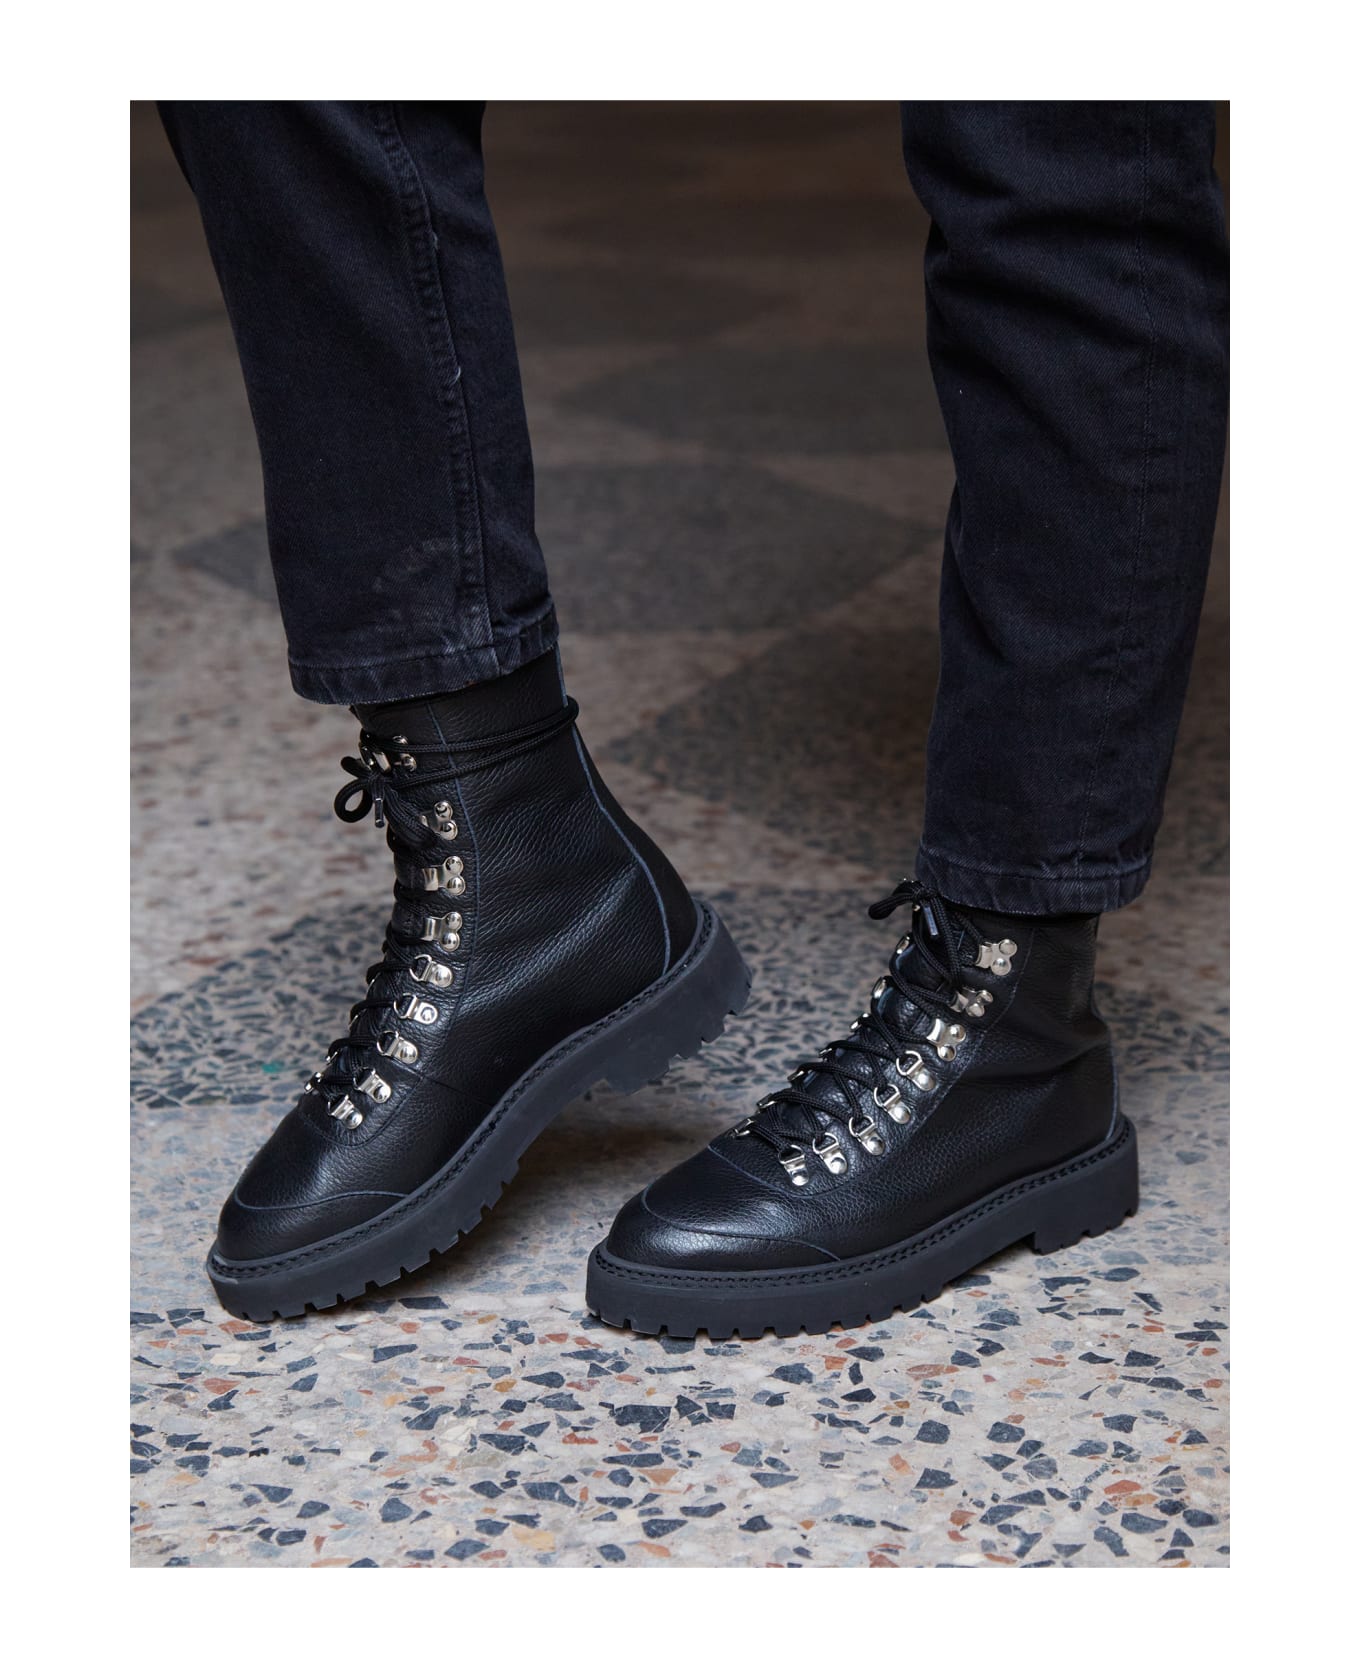 CB Made in Italy Tumbled Leather Boots Sirio - Black